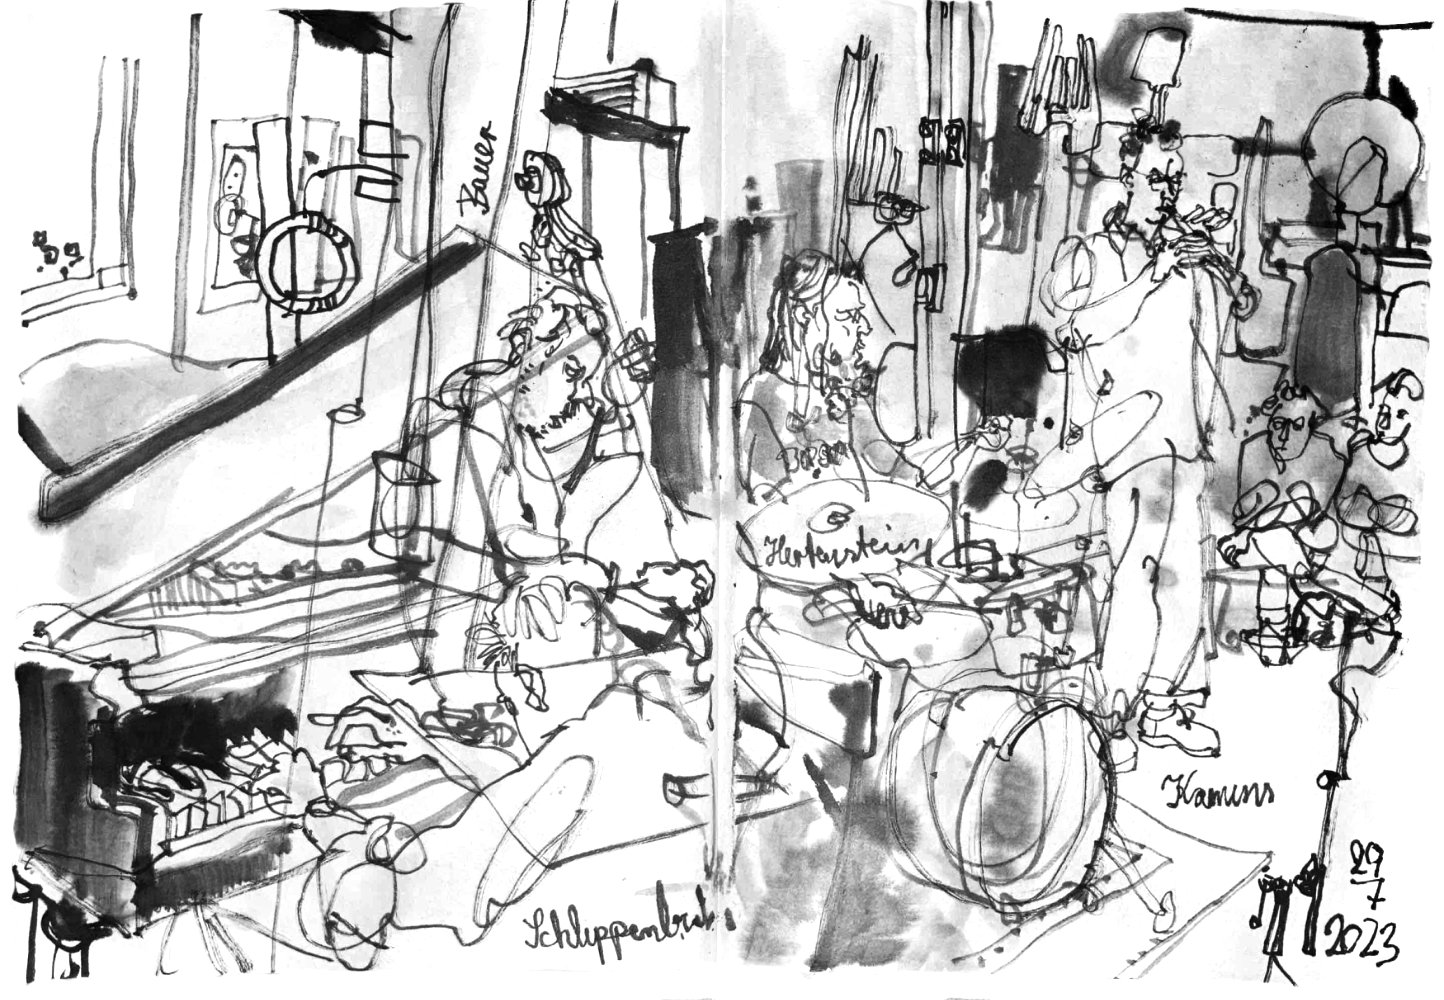 Ink drawing of four musicians in a gallery space